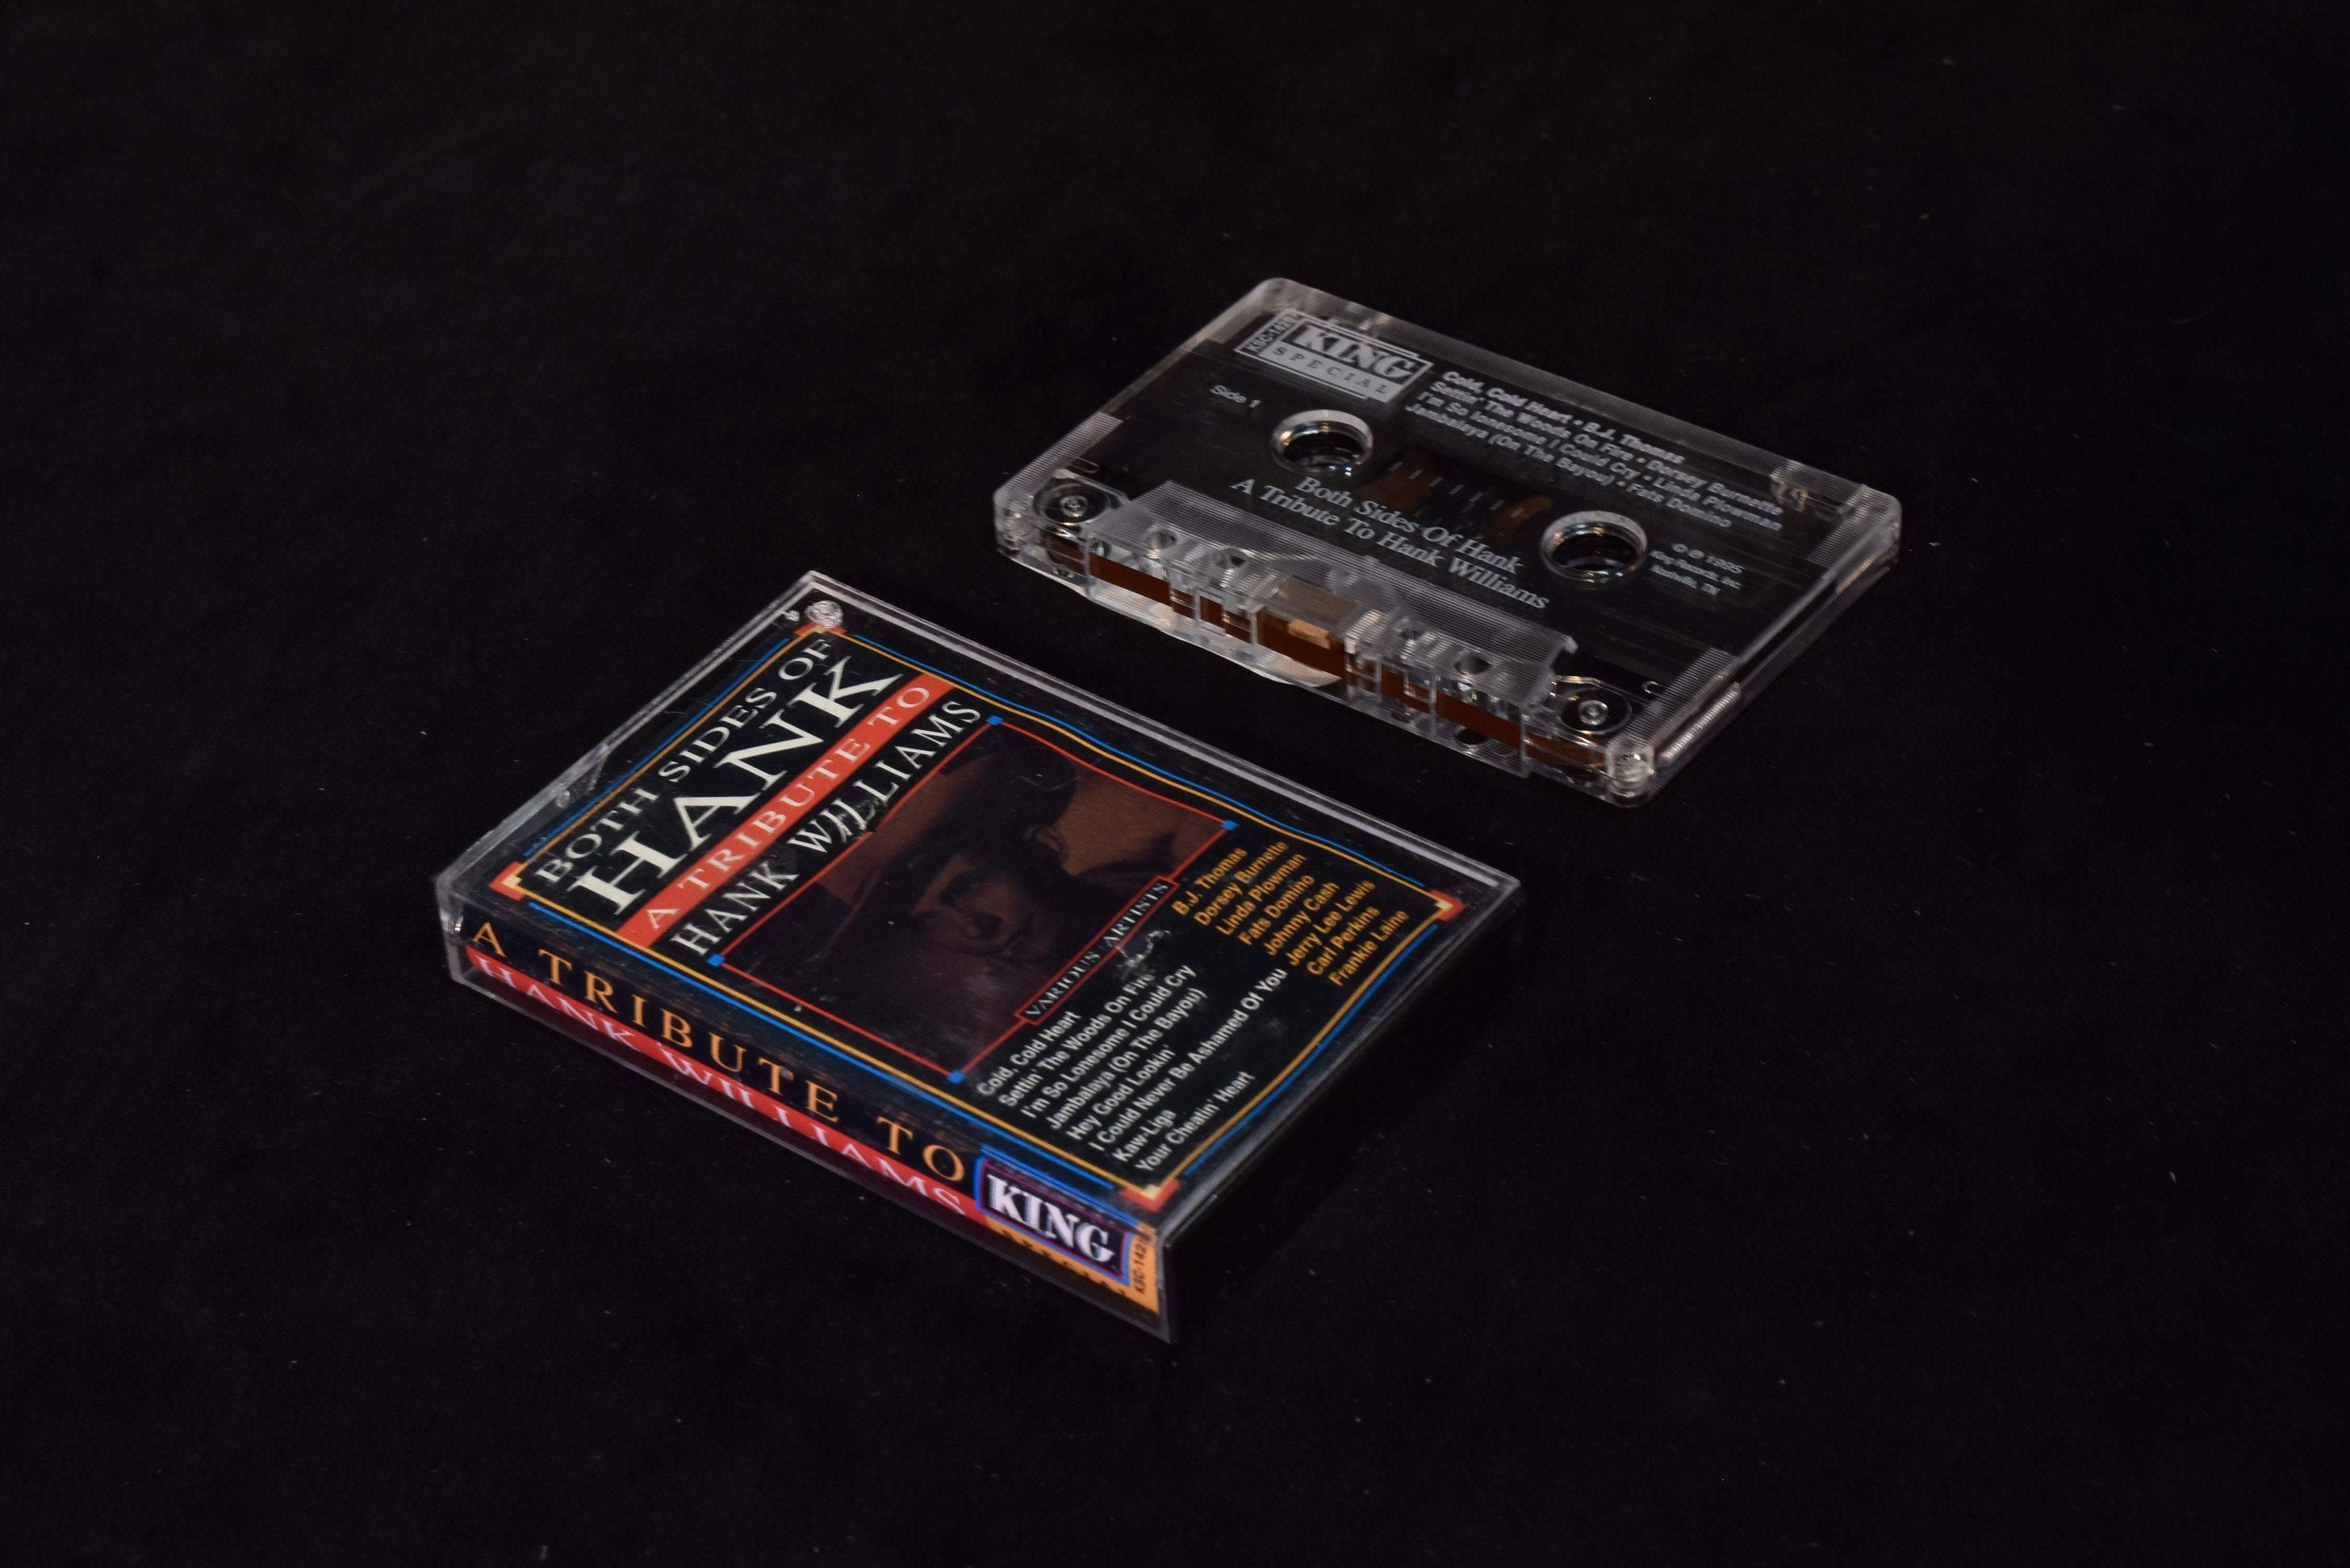 A tribute to Hank Williams cassette tape used